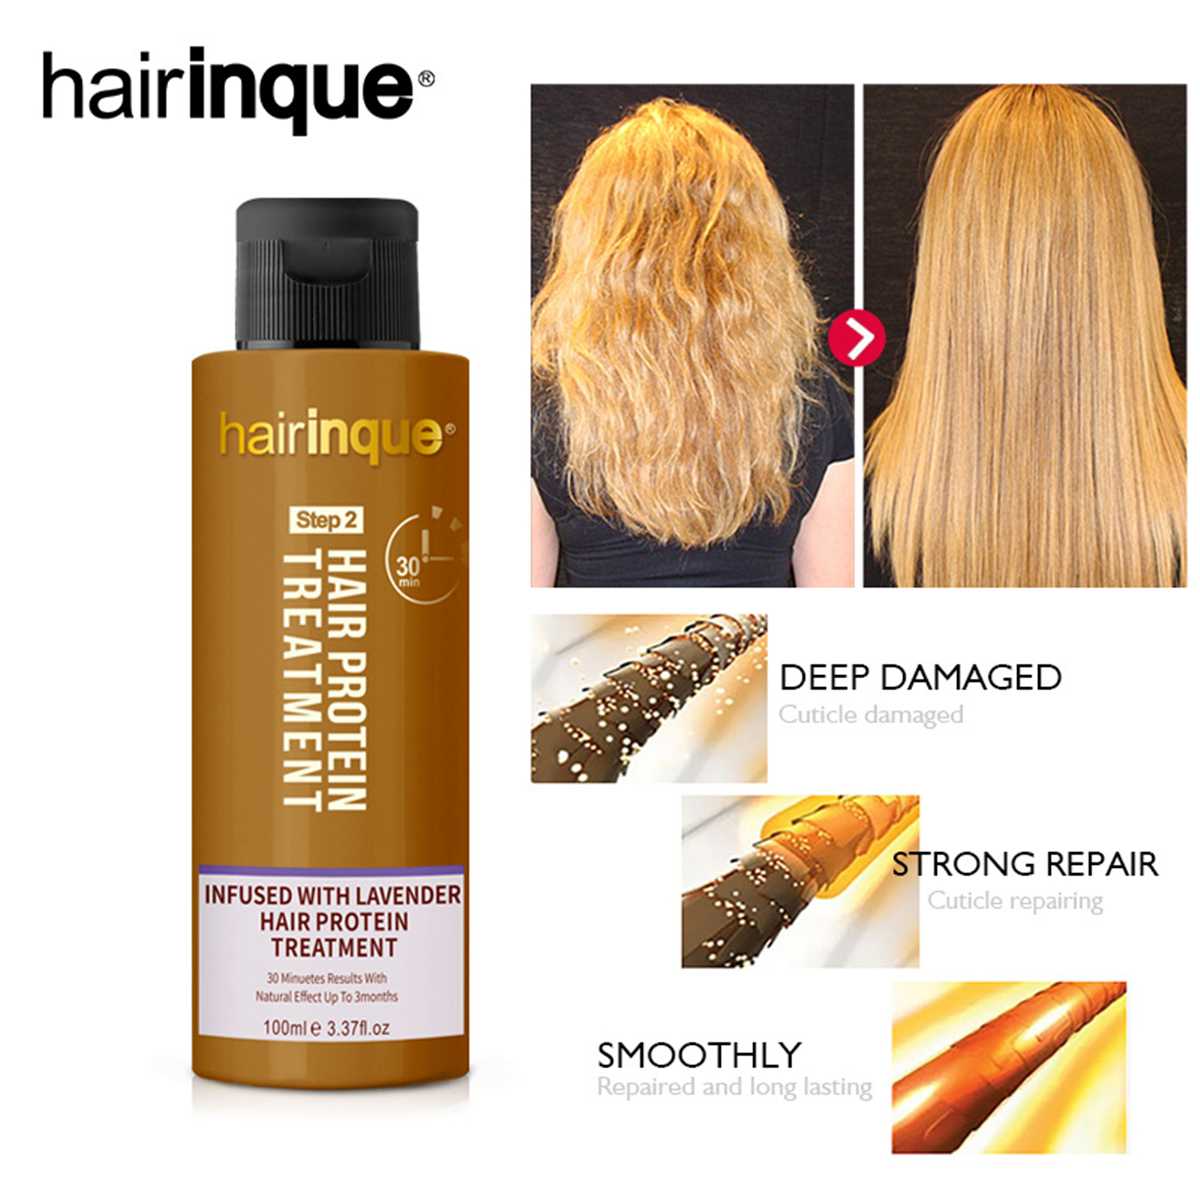 100ml Hairinque 12% Lavender Flavor Hair Protein Treatment to Straighten  Damaged and 5%Hair Protein Hair Repair Curly Hair Care - Price history &  Review | AliExpress Seller - Shanger Store 